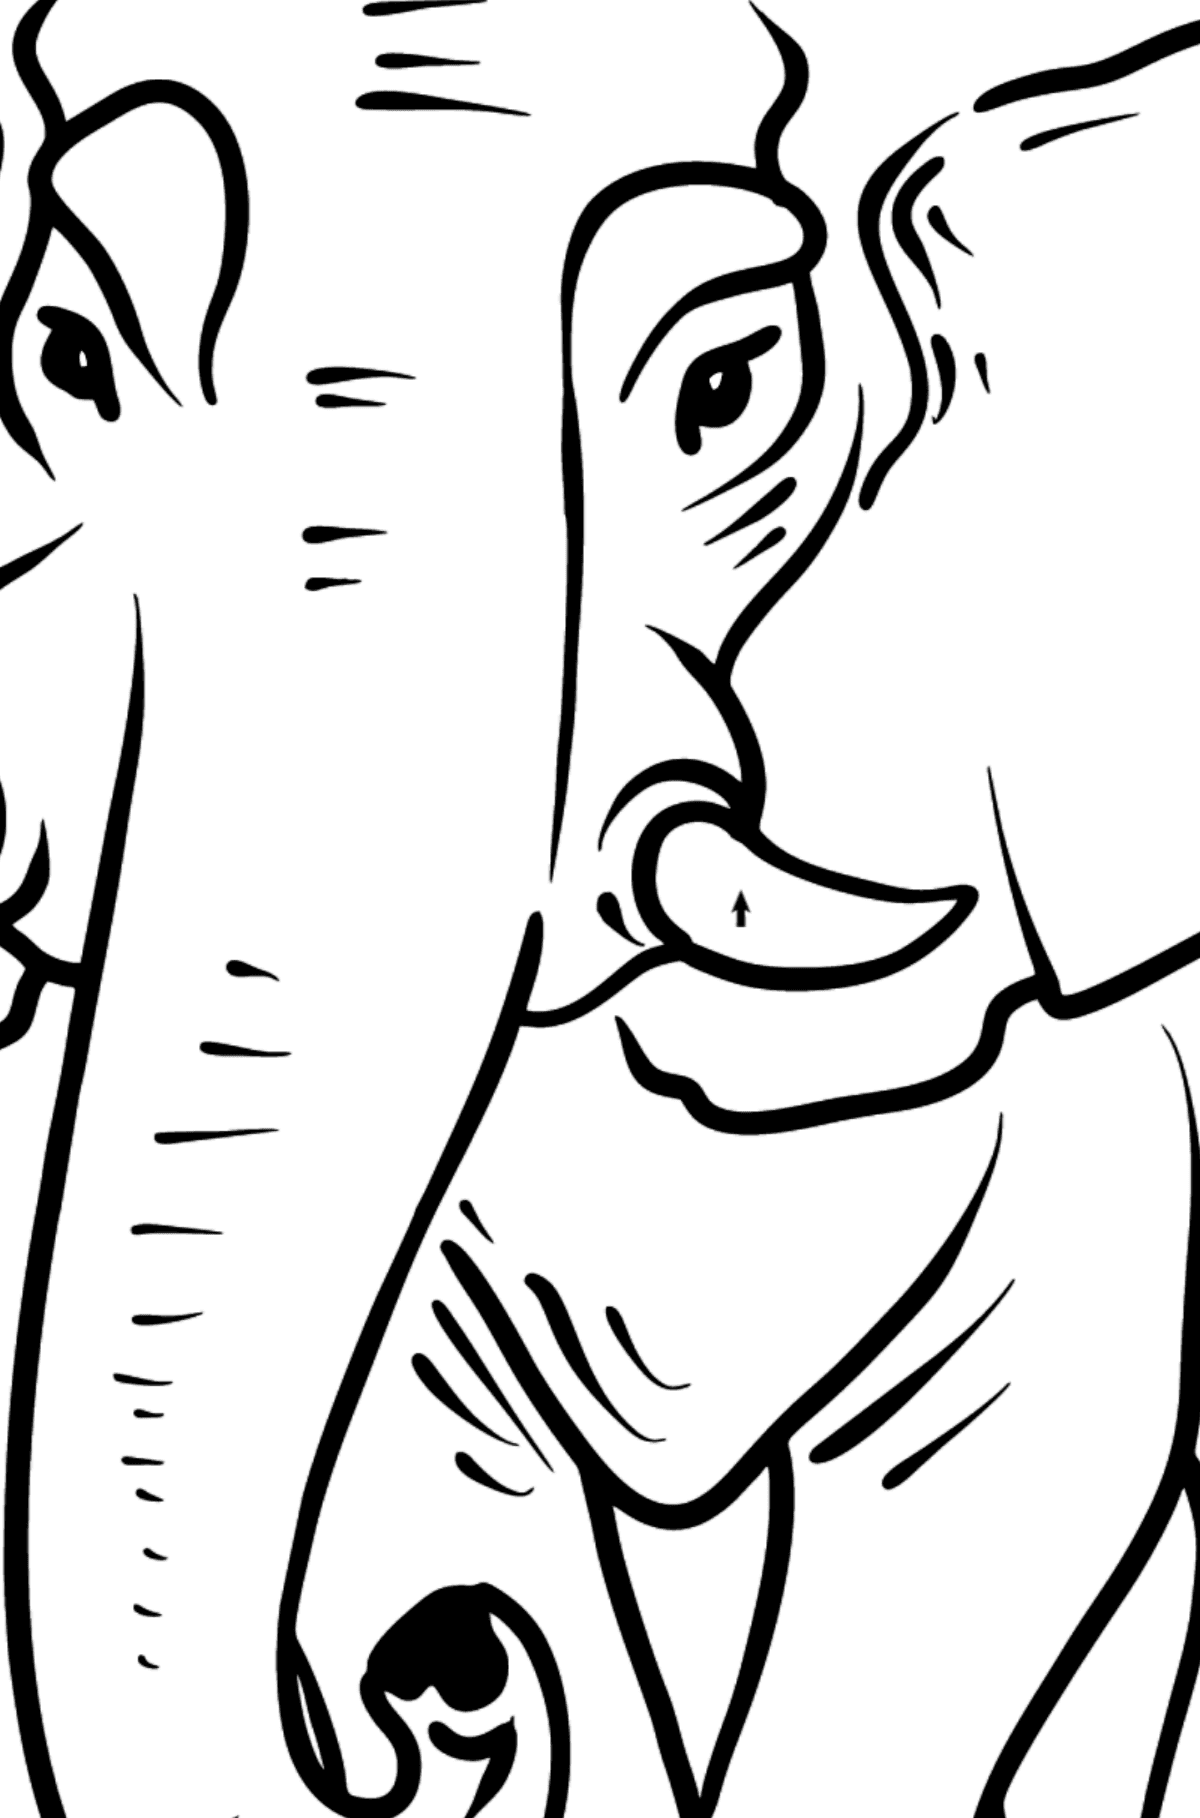 Elephant coloring page - Coloring by Symbols and Geometric Shapes for Kids